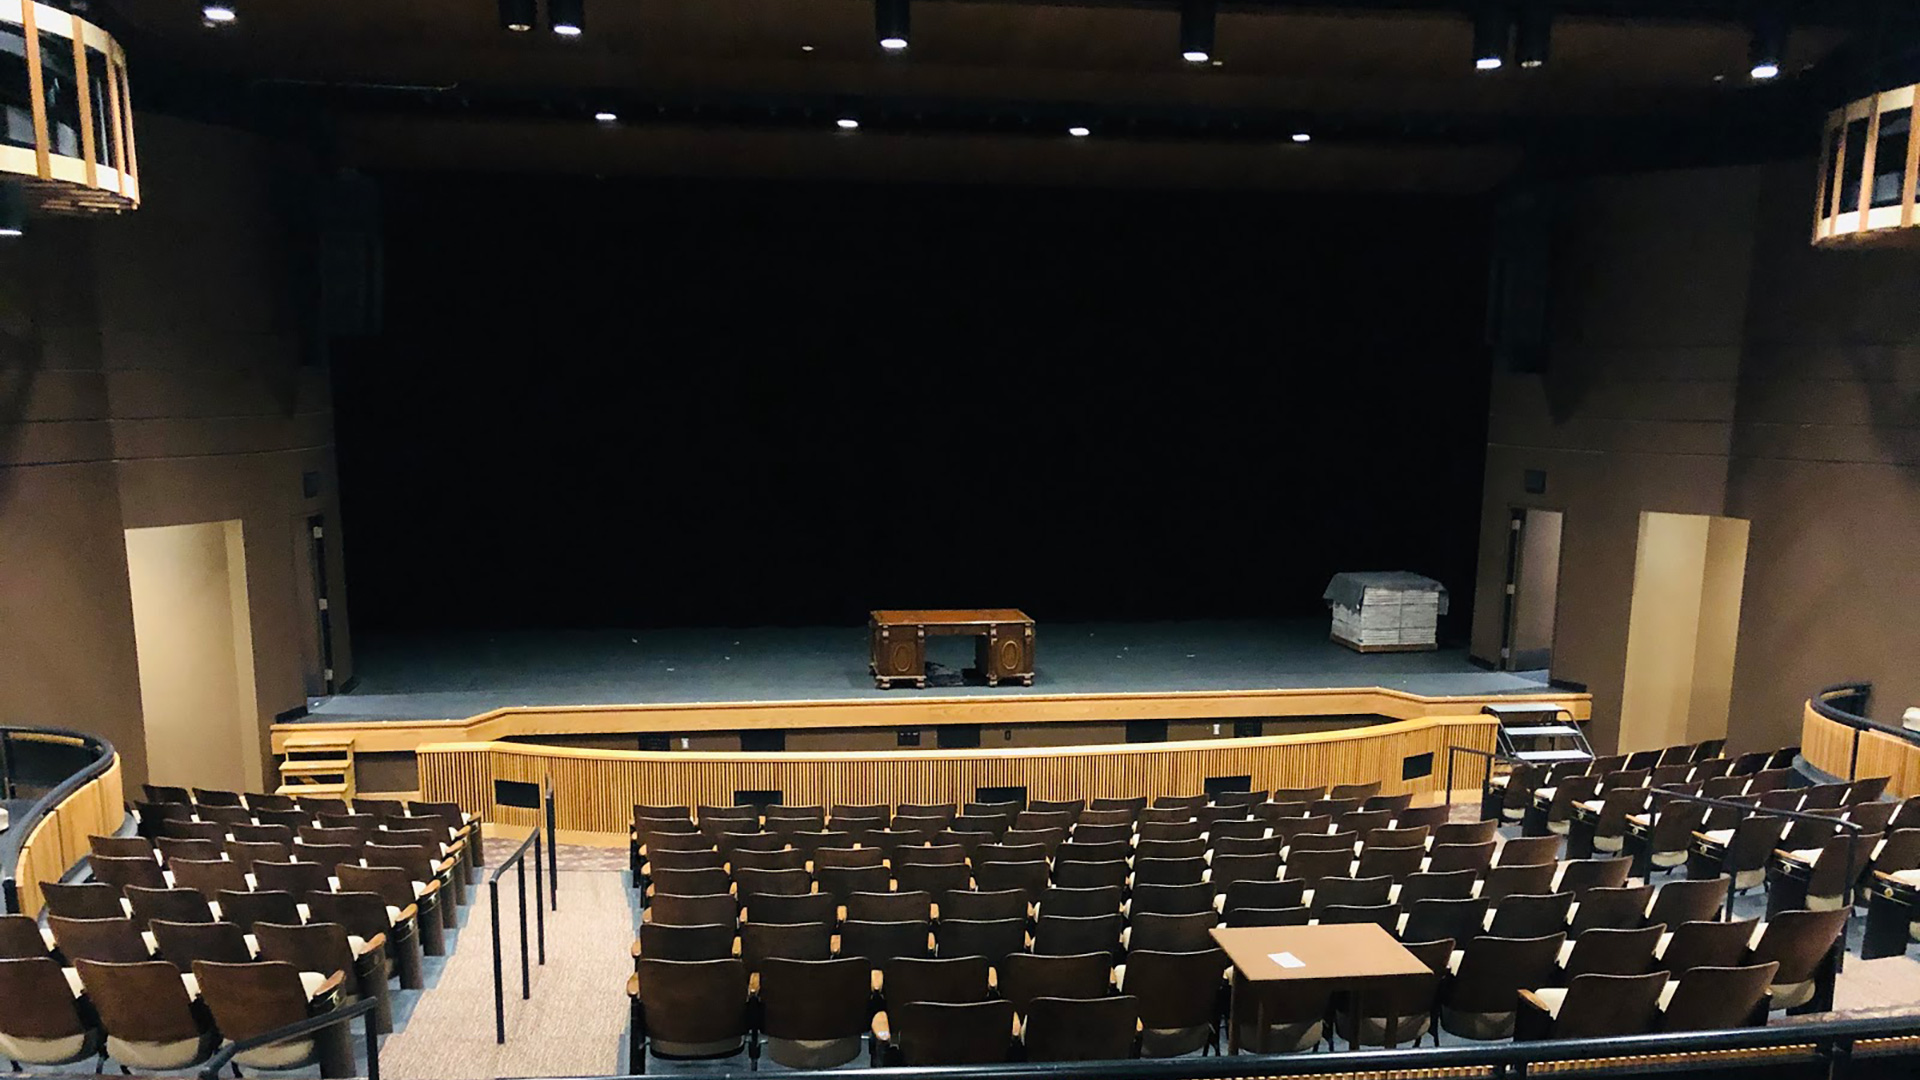 Stage in performing arts center, sections of seats look towards elevated platform with black curtains